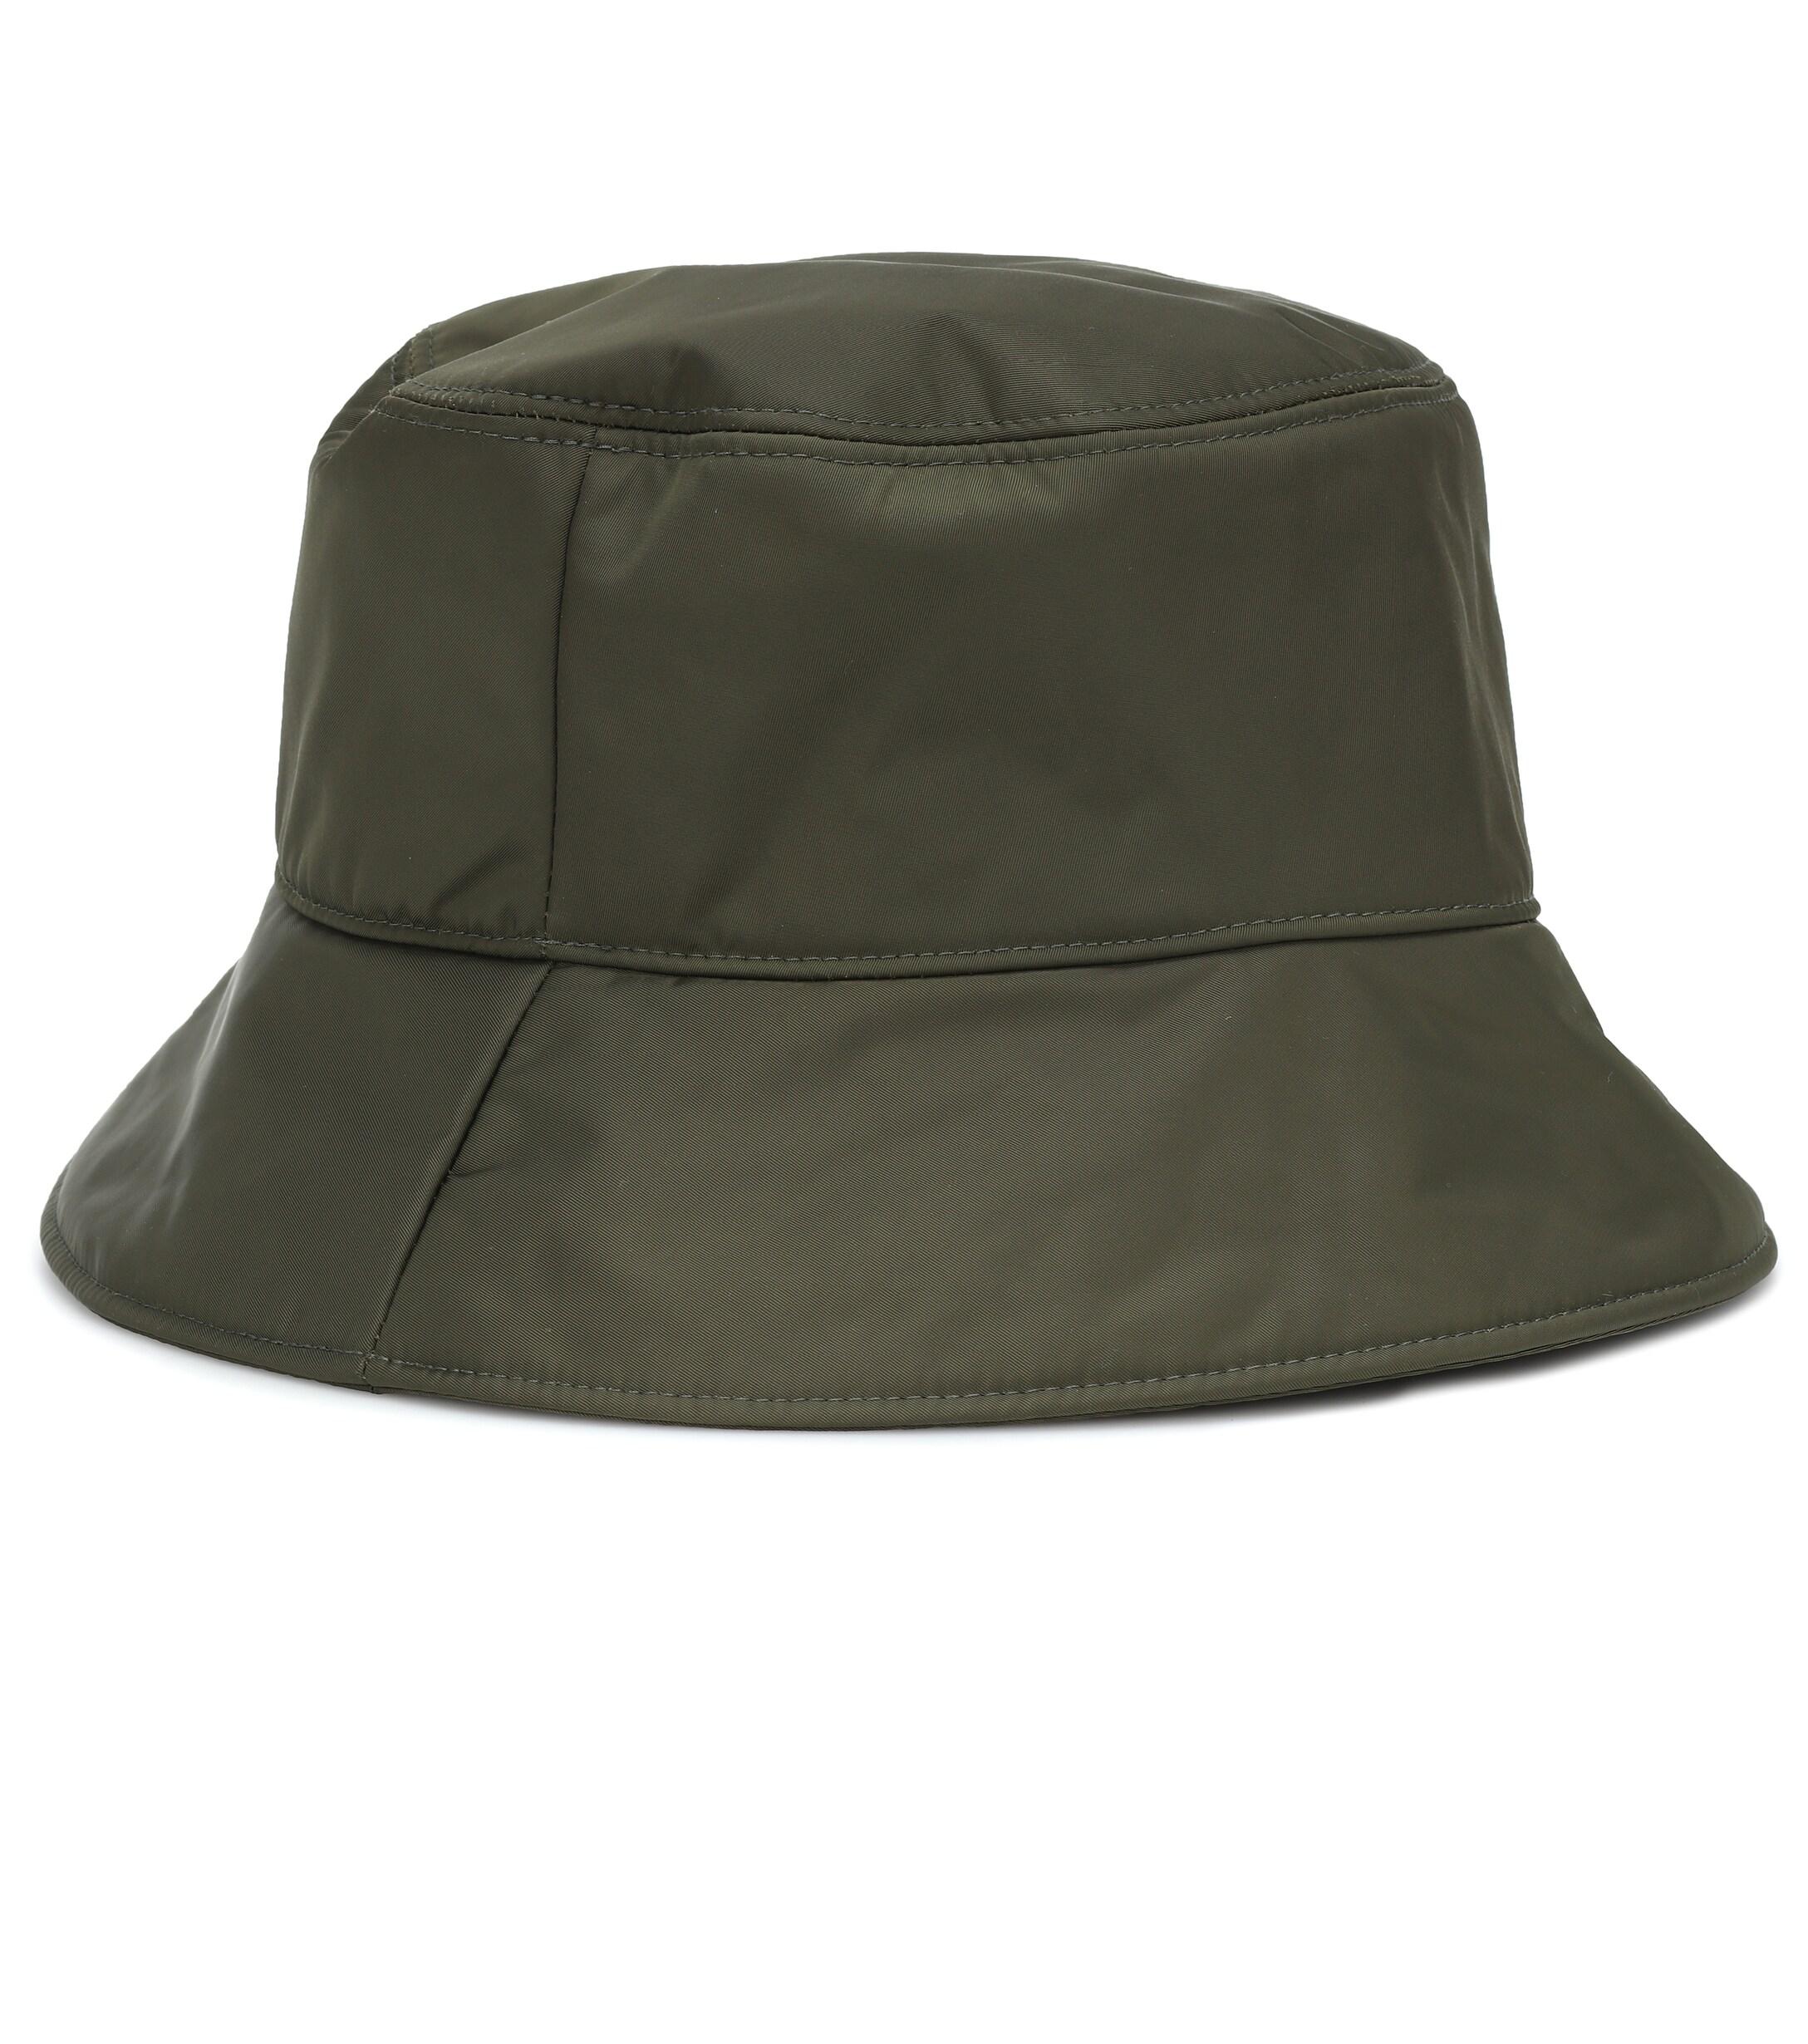 Moncler Bucket Hat in Army Green (Green) - Lyst